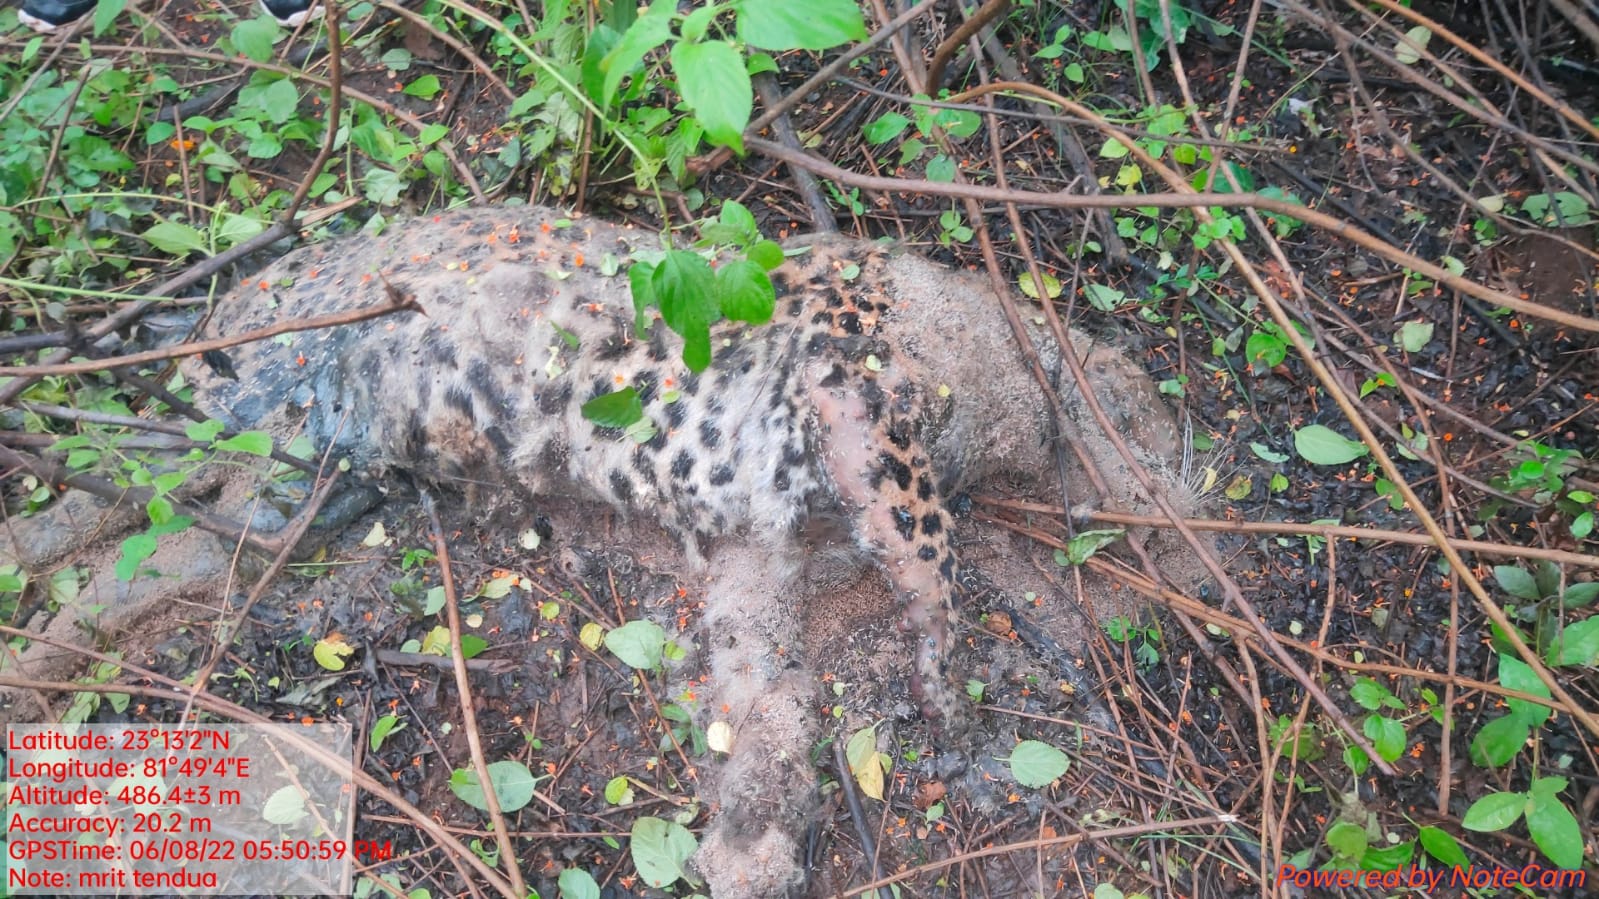 Two accused were sent to jail in leopard hunting, one accused in the g